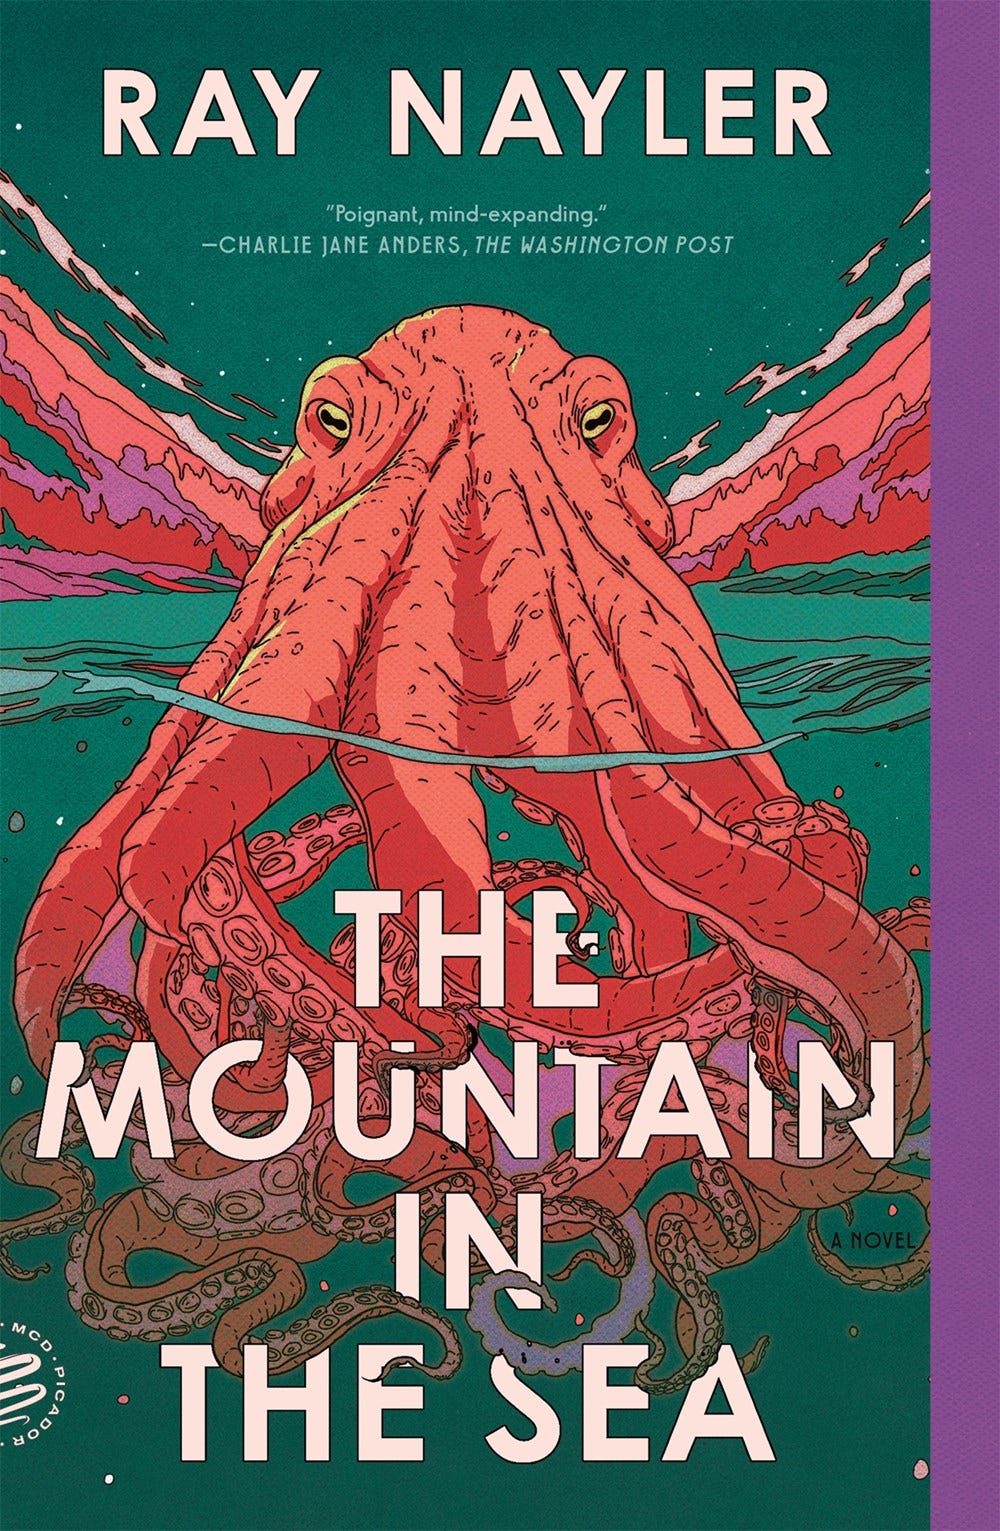 The cover of the book 'The Mountain in the Sea' by Ray Nayler, with an illustration of a pink-orange octopus in the water, in front of a starry sky